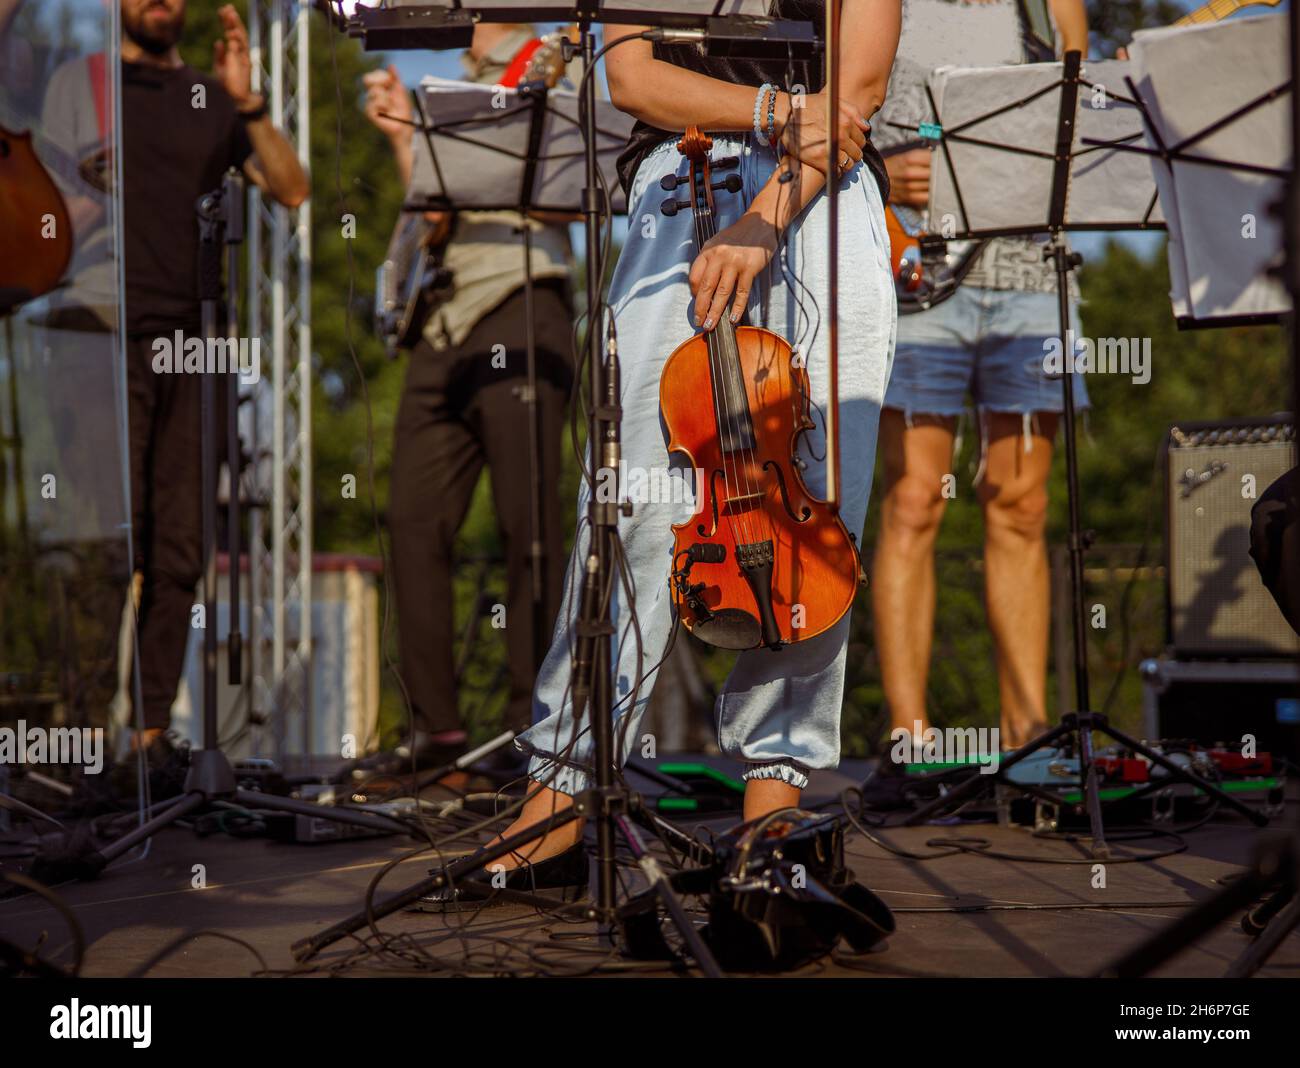 Female violinist standing near music stand outdoors Stock Photo